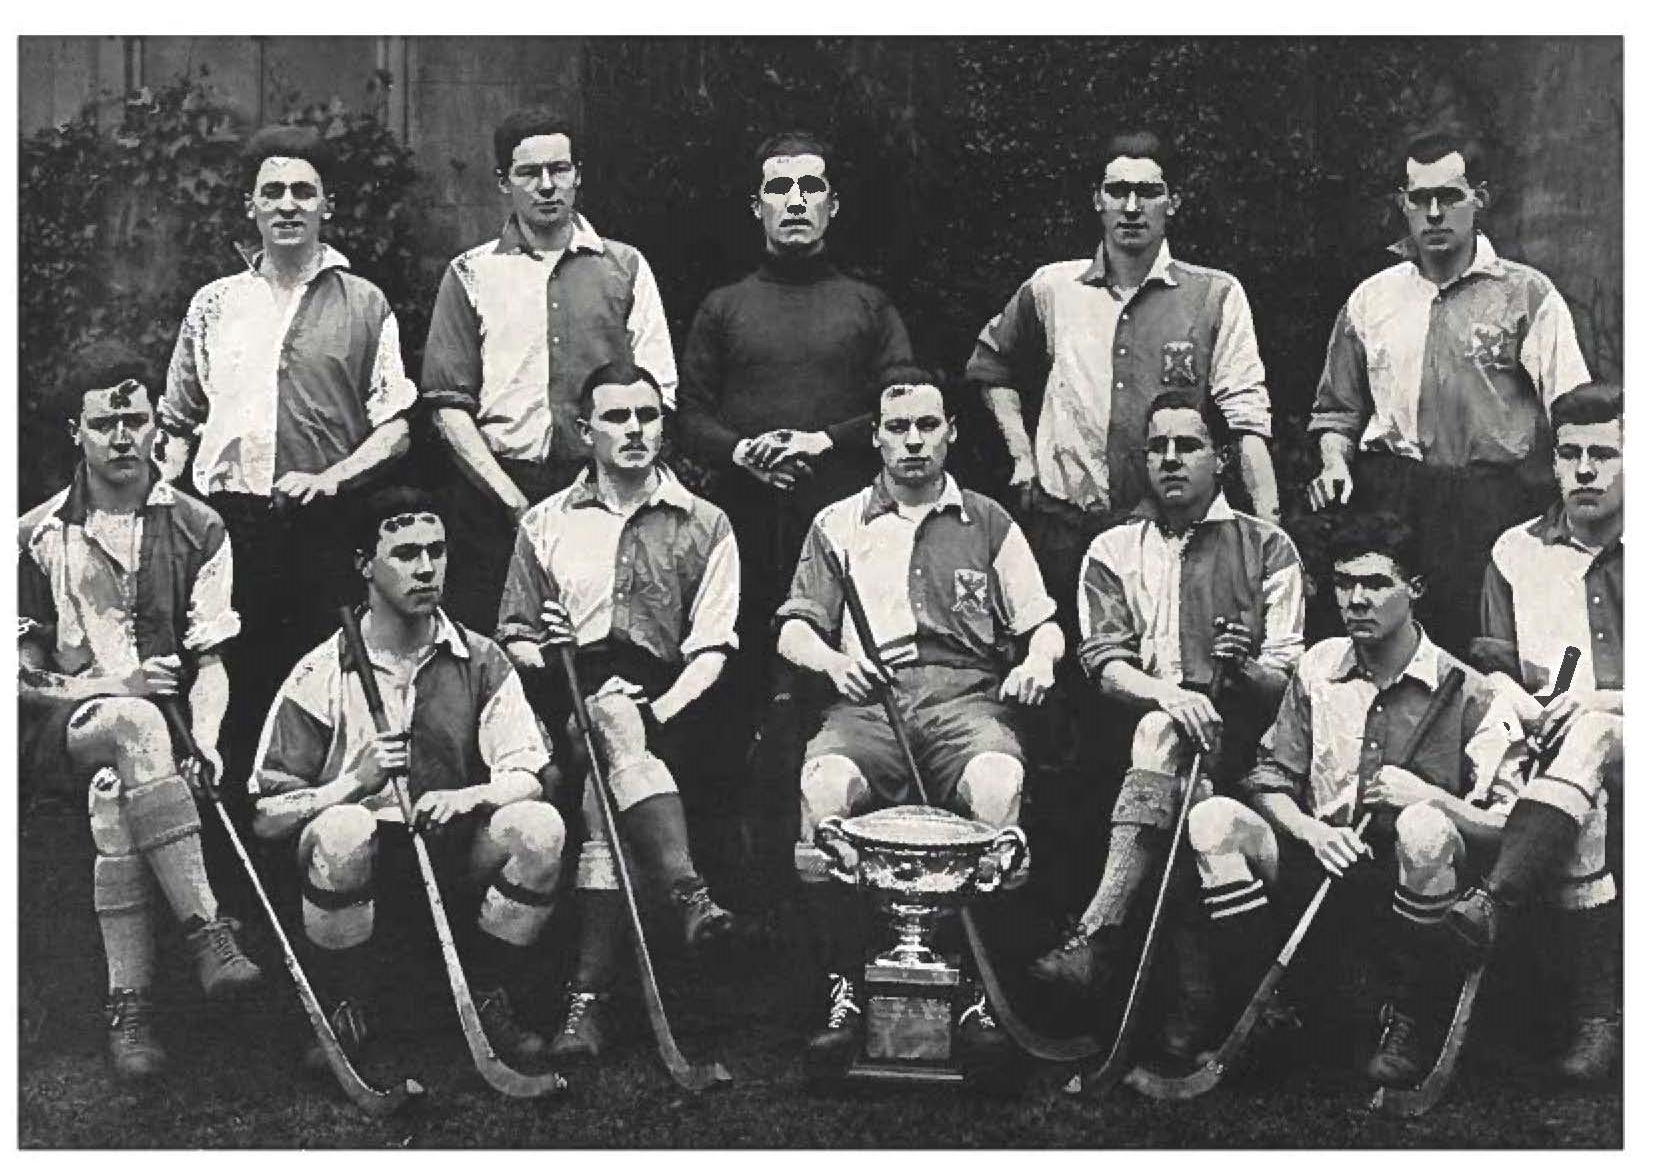 A black and white photo of shinty